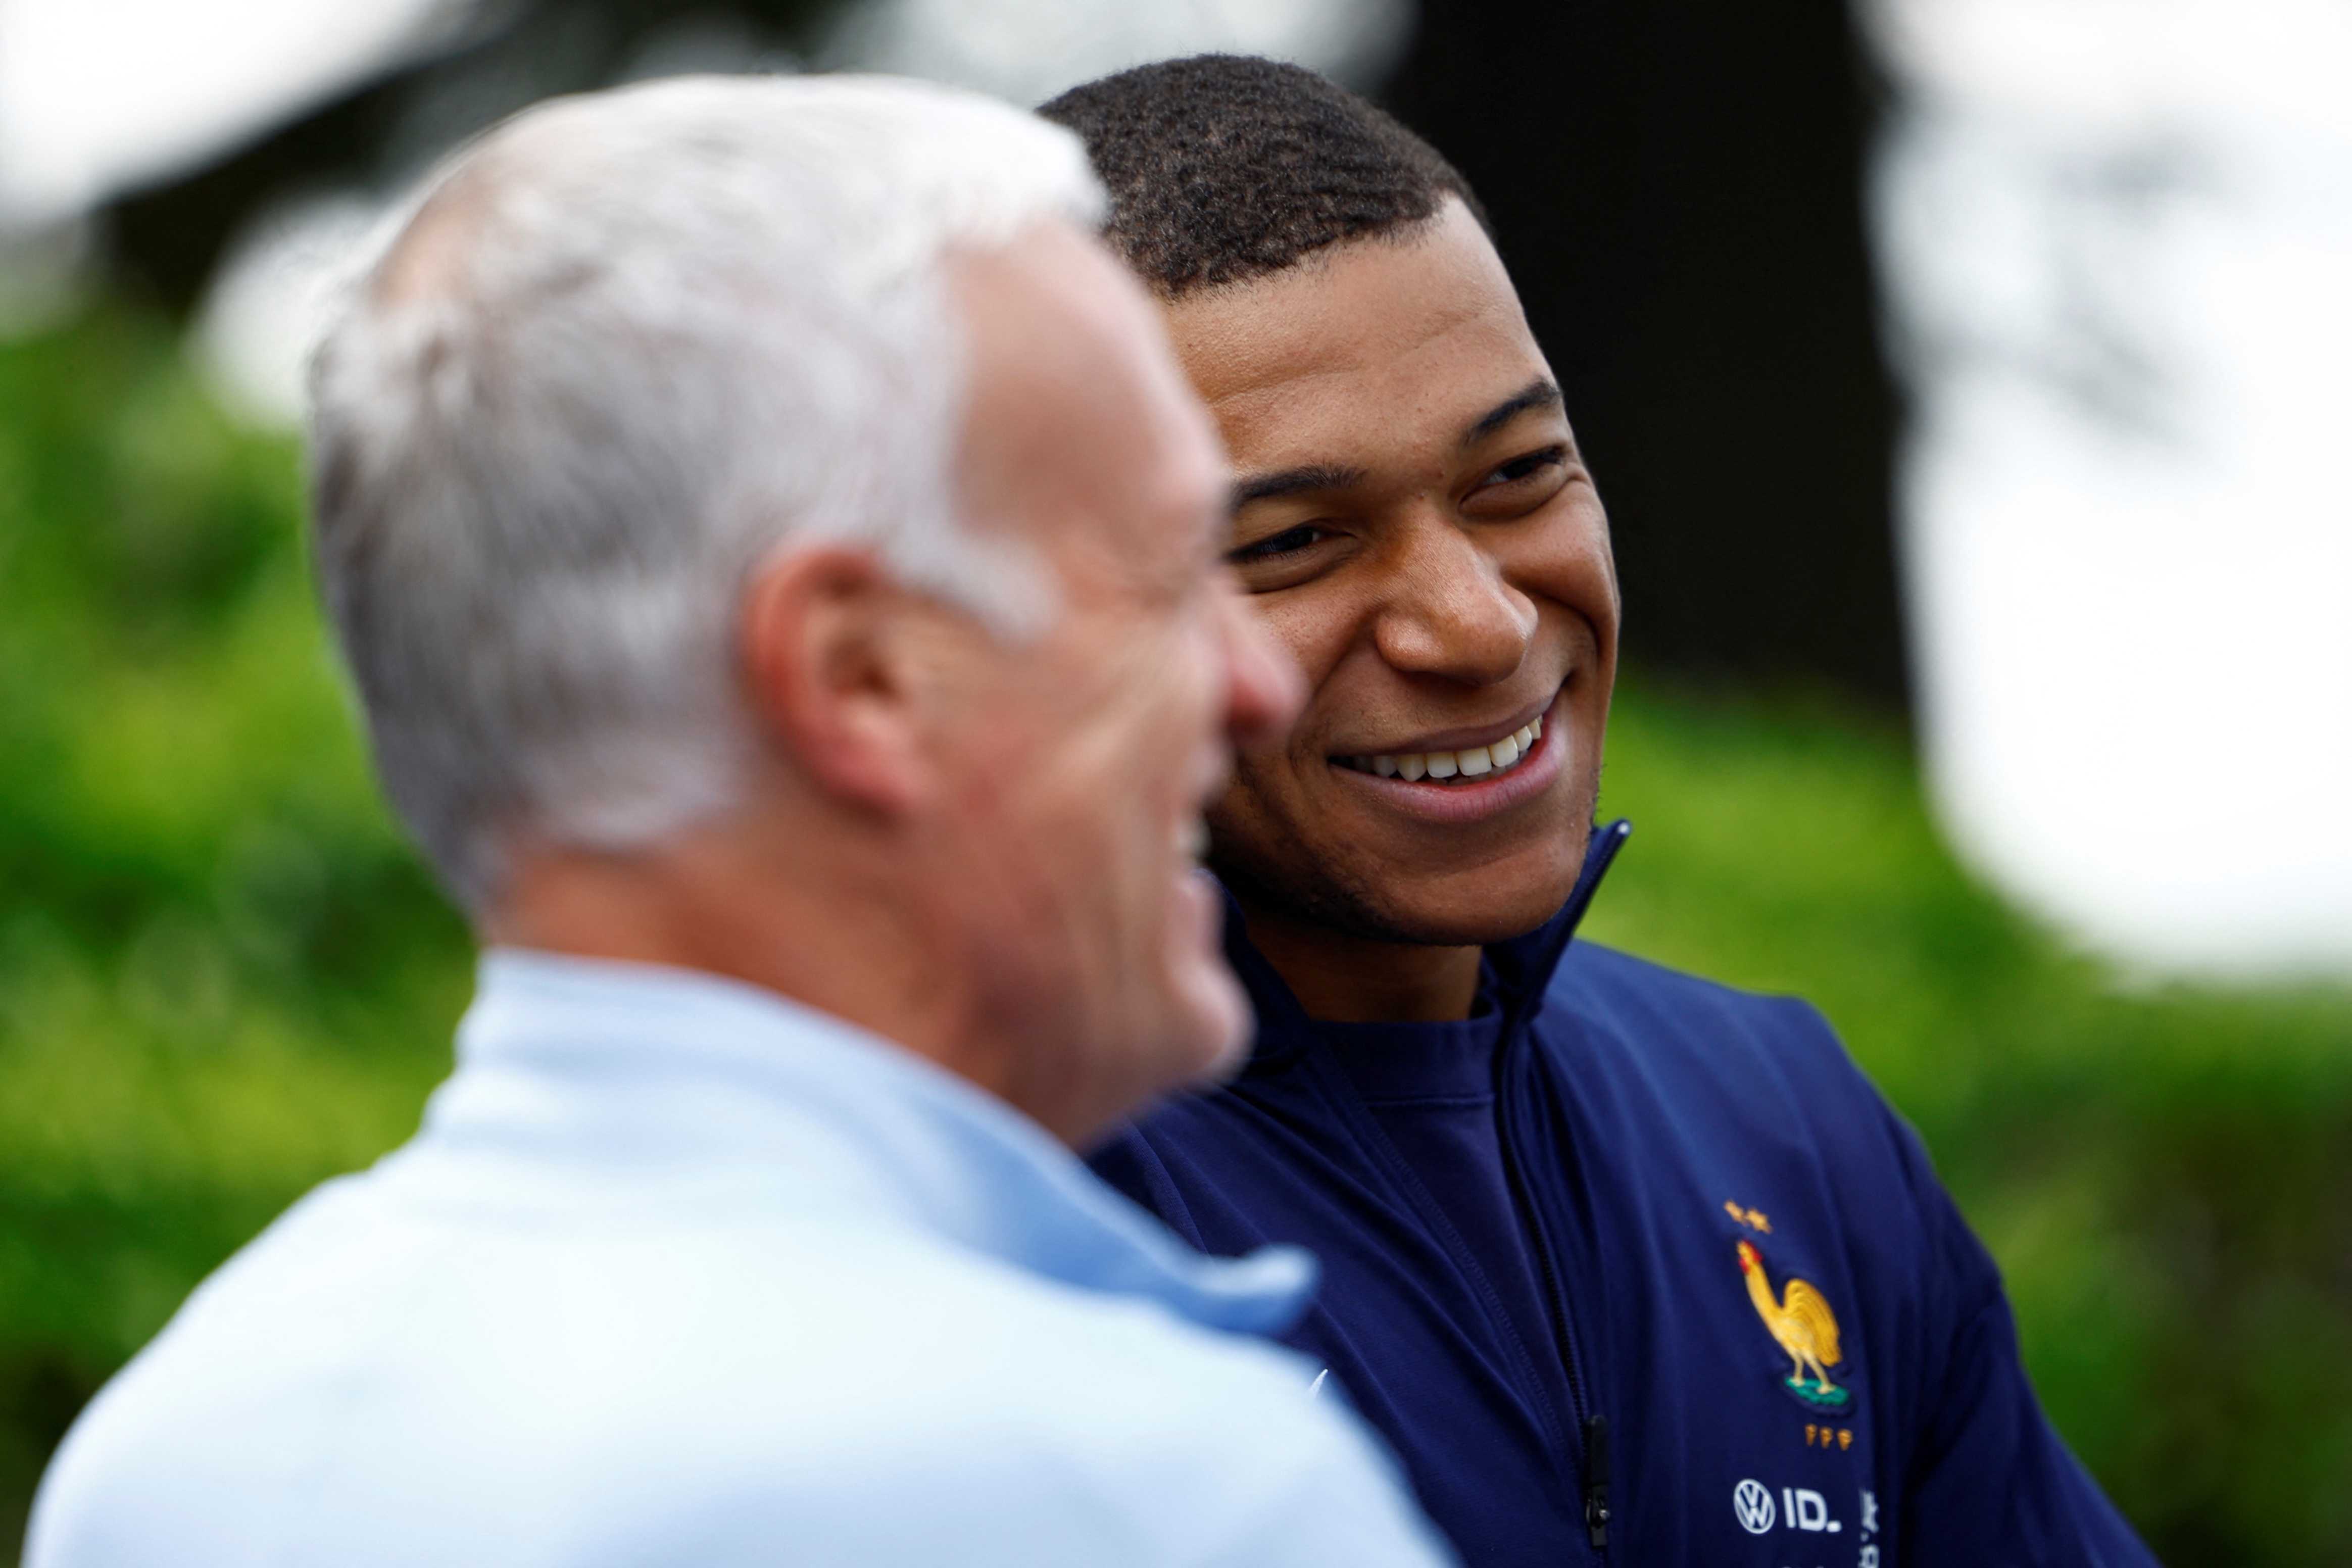 Clairefontaine-en-yvelines (France), 03/06/2024.- French national football team head coach Didier Deschamps (L) and French player Kylian Mbappe wait for the arrival of French President Emmanuel Macron for a lunch at their training camp ahead of the UEFA Euro 2024, in Clairefontaine-en-Yvelines, France, 03 June 2024. (Francia) EFE/EPA/SARAH MEYSSONNIER / POOL MAXPPP OUT
